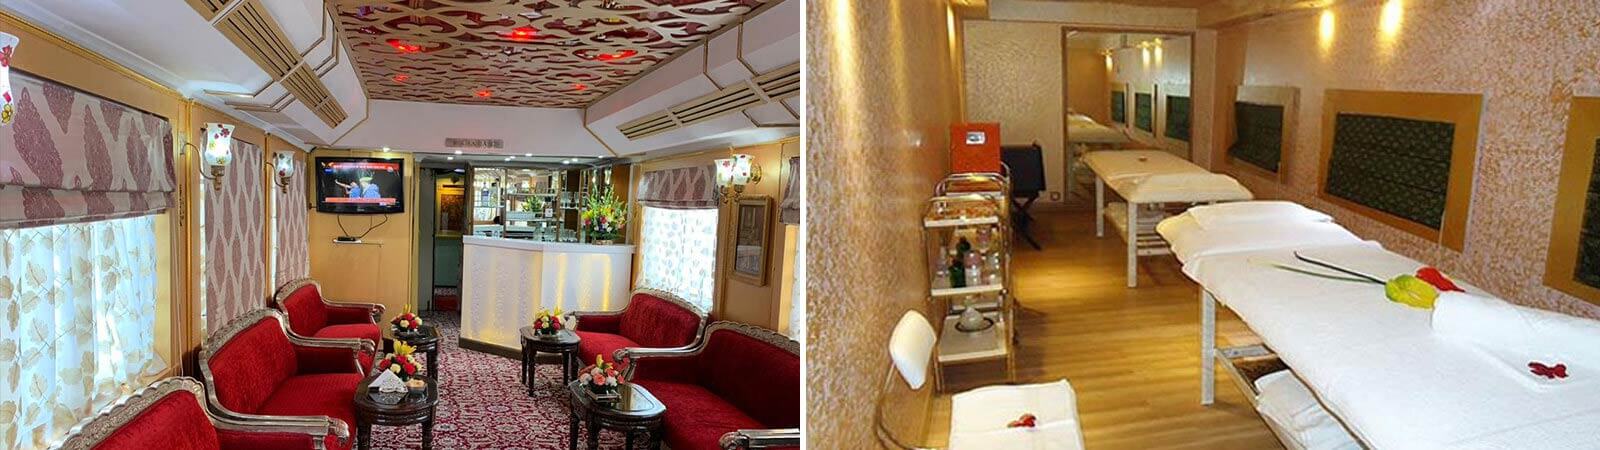 Palace On Wheels Information